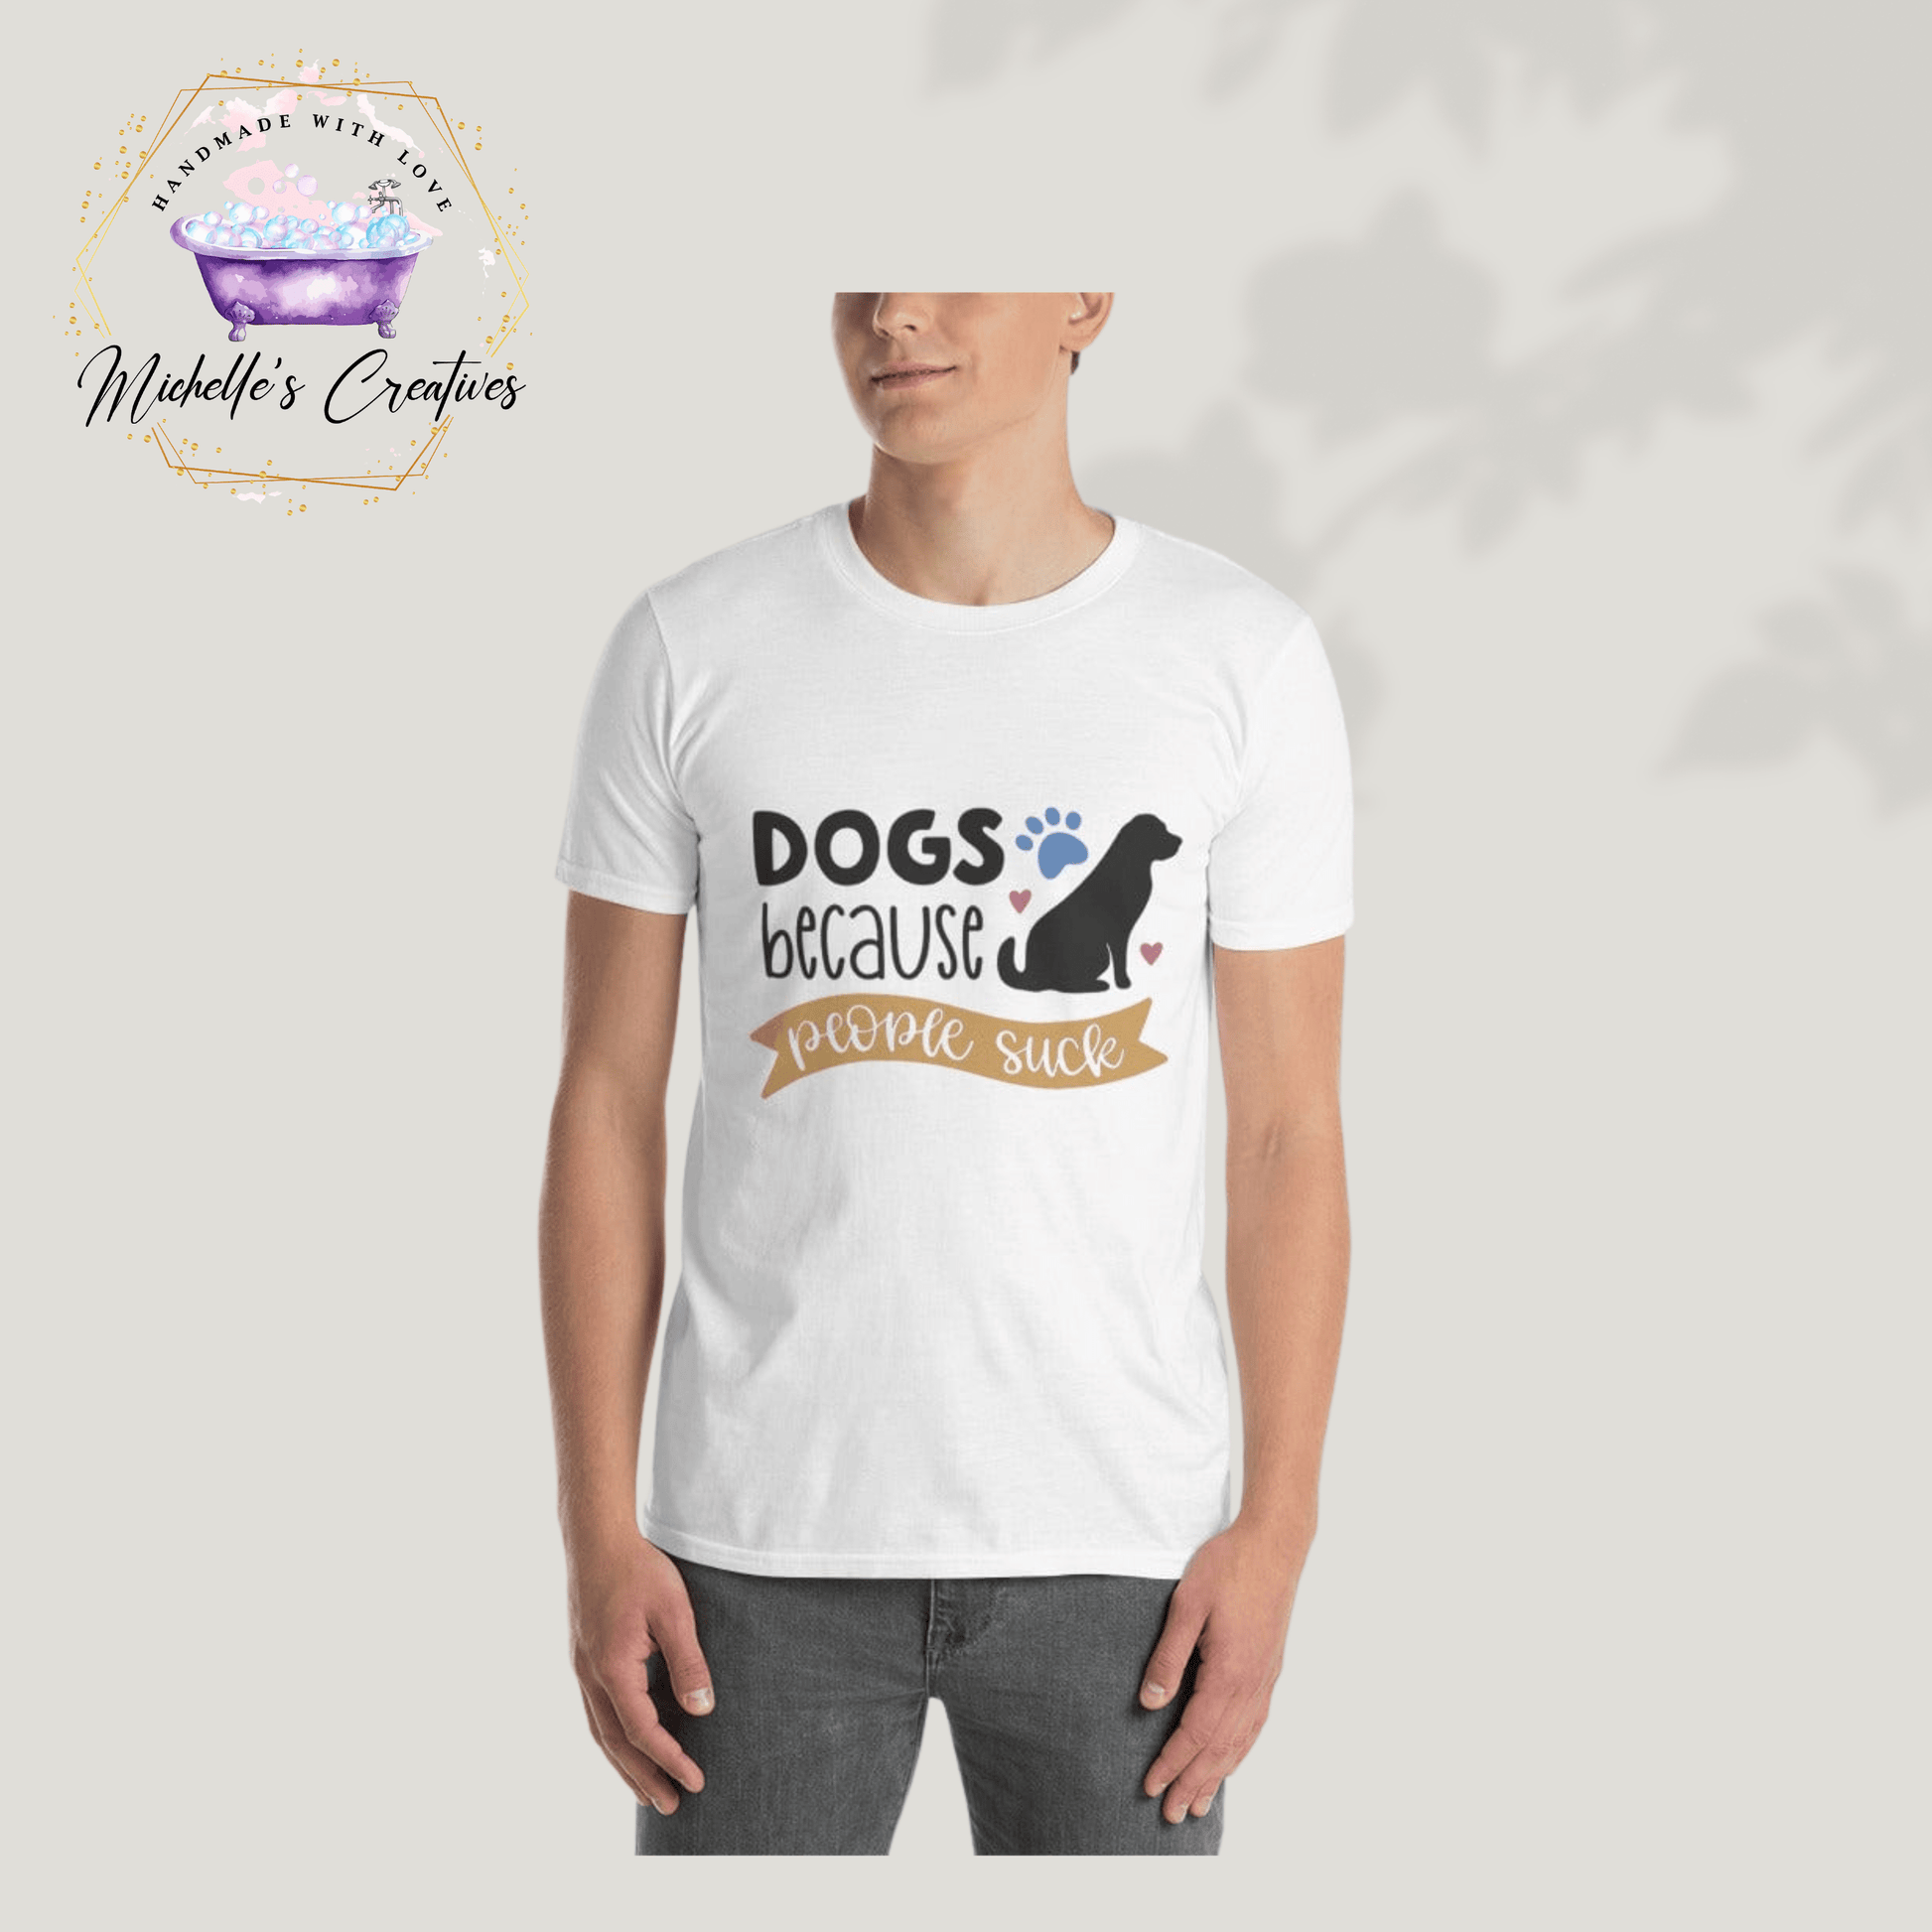 Michelle's Creatives White / S Love Dogs Because People Suck Short-Sleeve Unisex T-Shirt 1421957_473